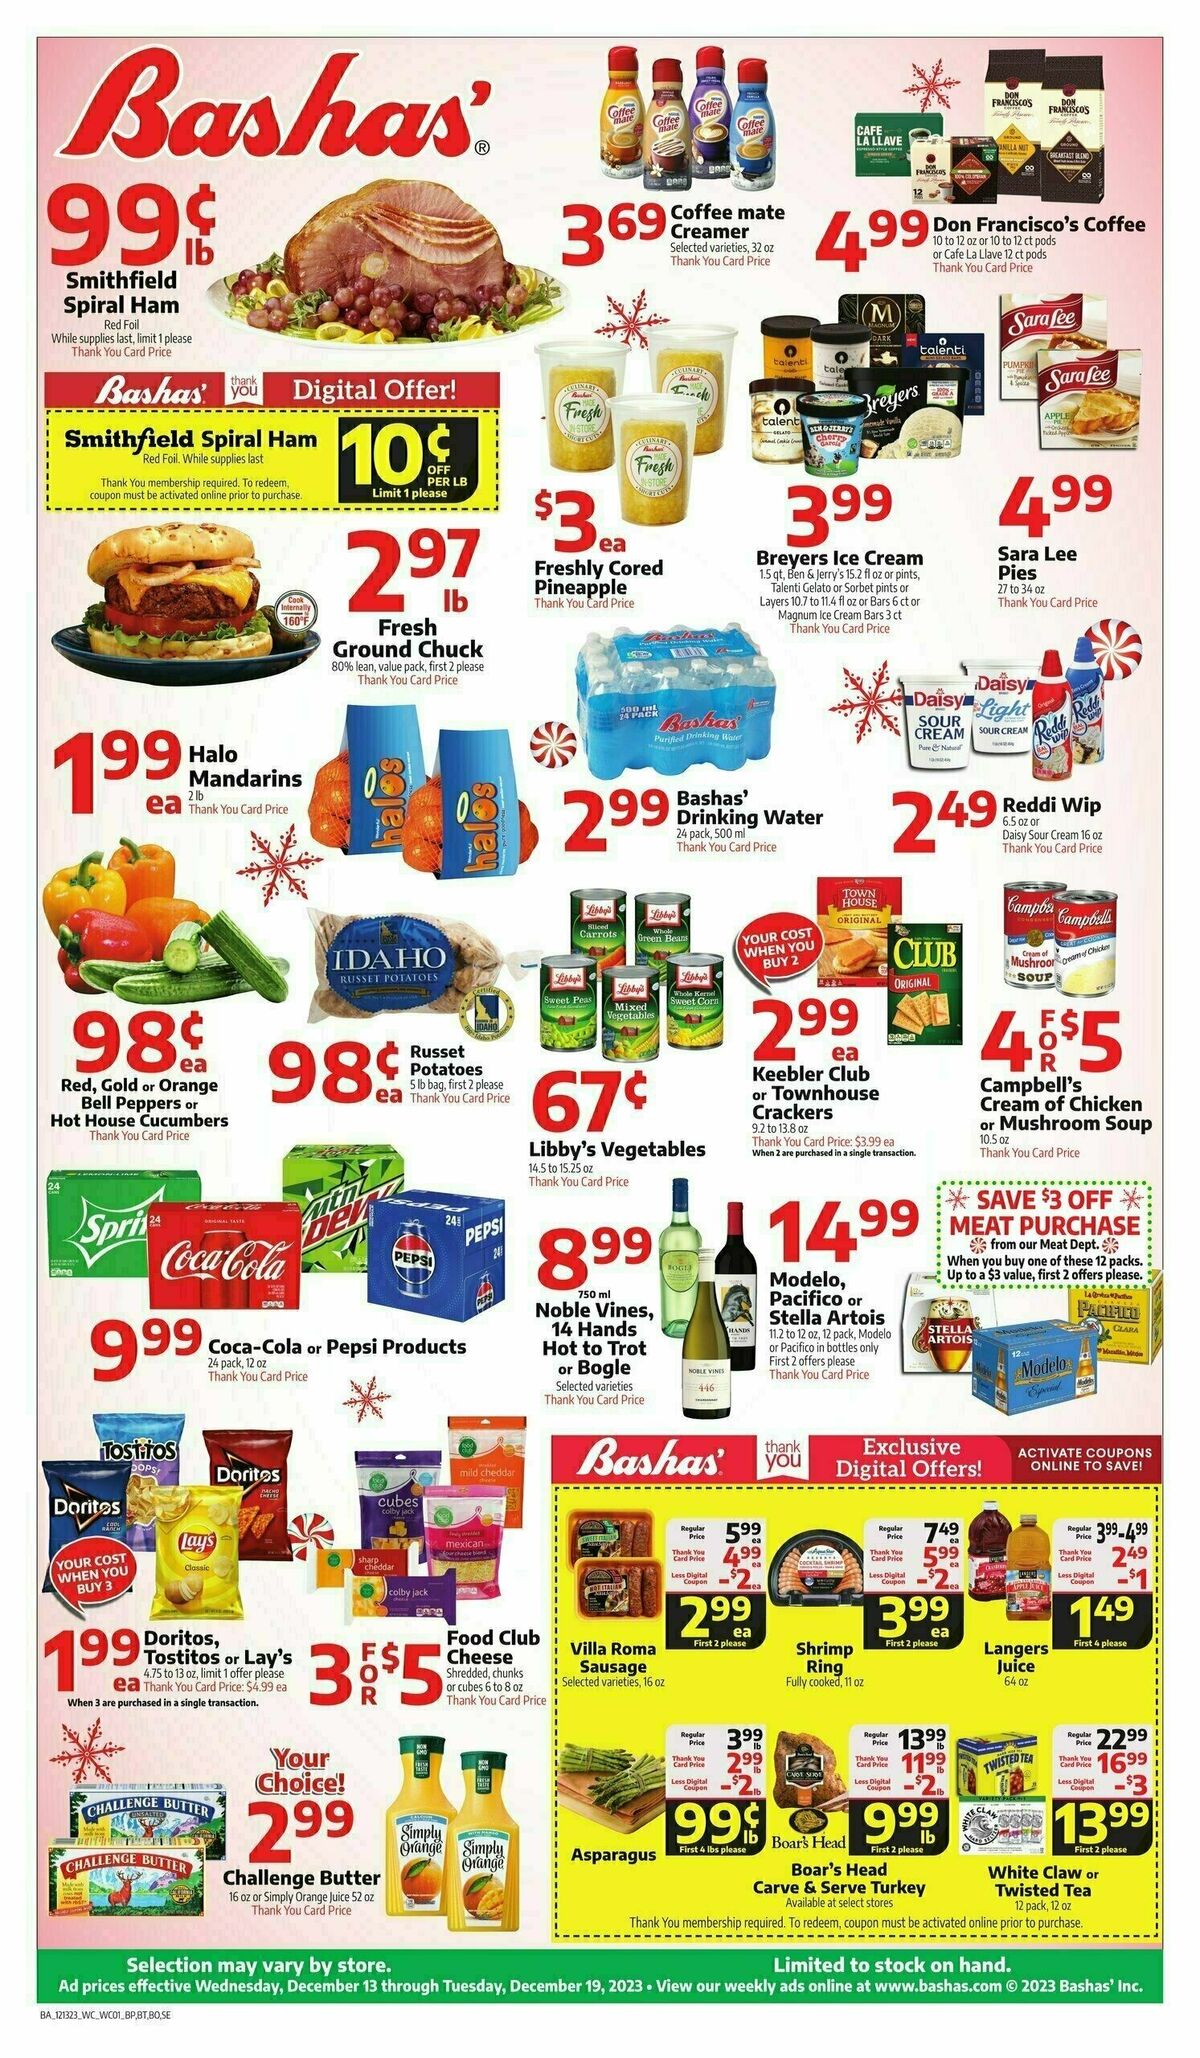 Bashas Weekly Ad from December 13